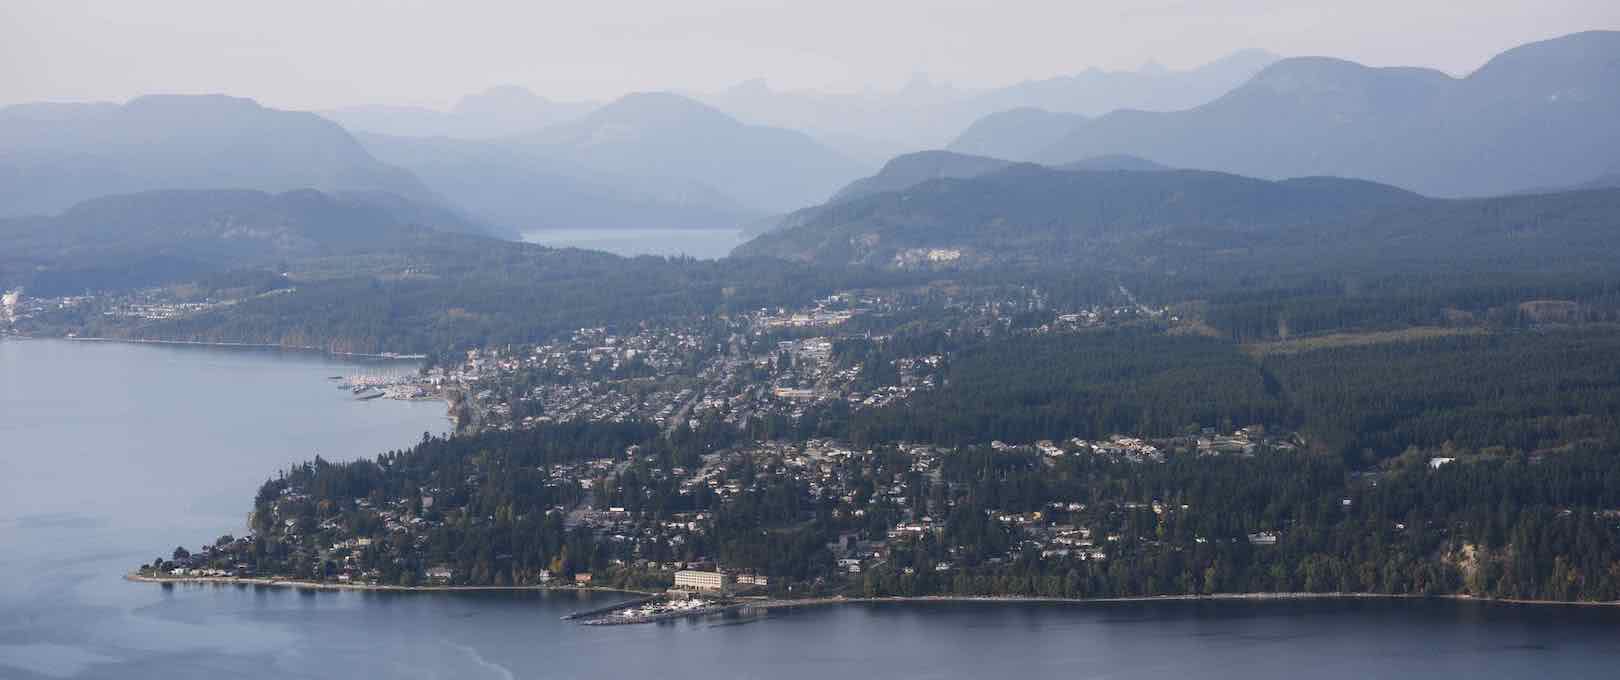 An aerial view of Powell River, British Columbia